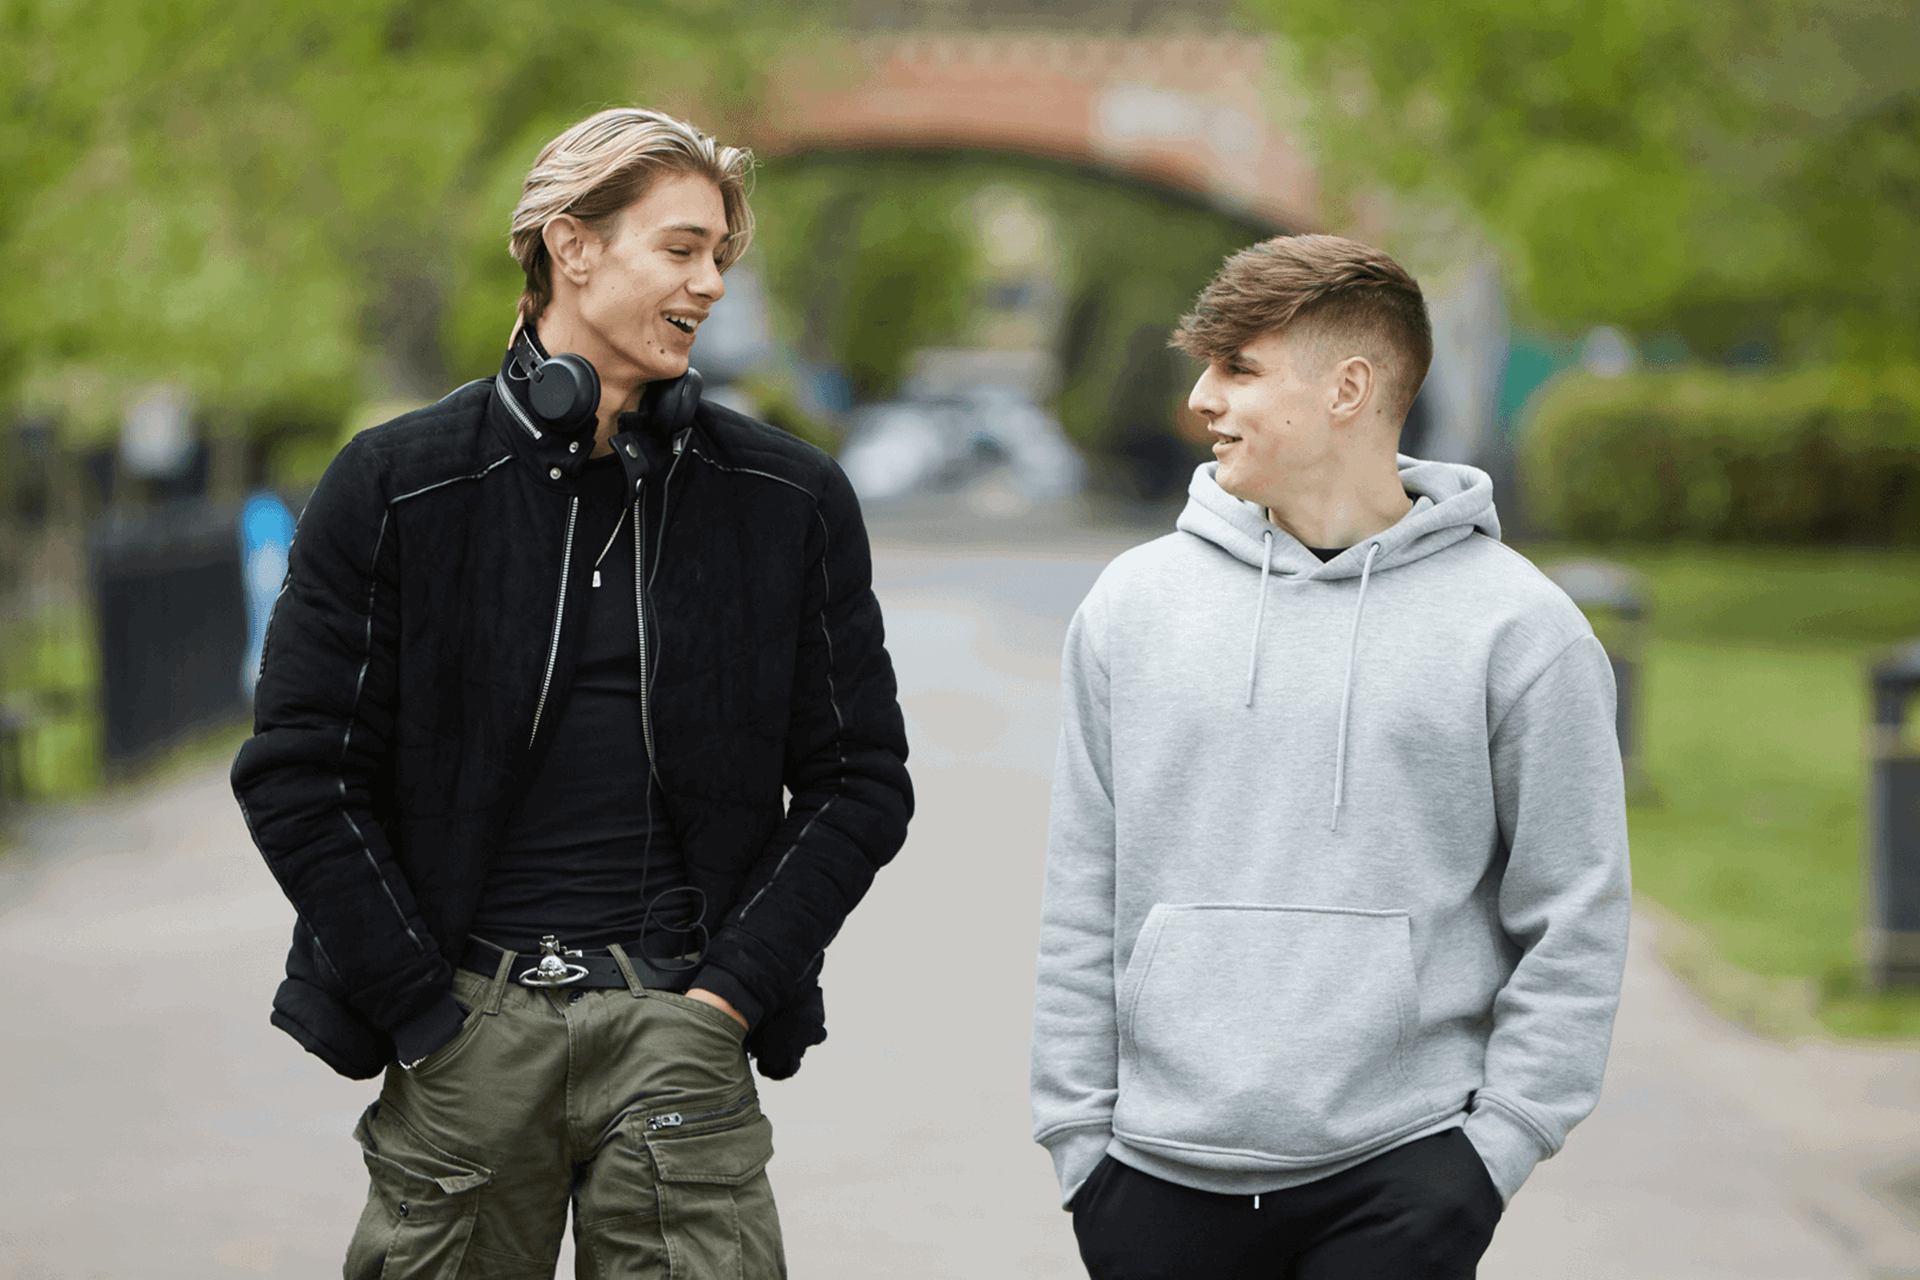 Two young men walking down a together, talking and smiling. One is wearing a black jacket and headphones around his neck. The other is wearing a grey hoodie.